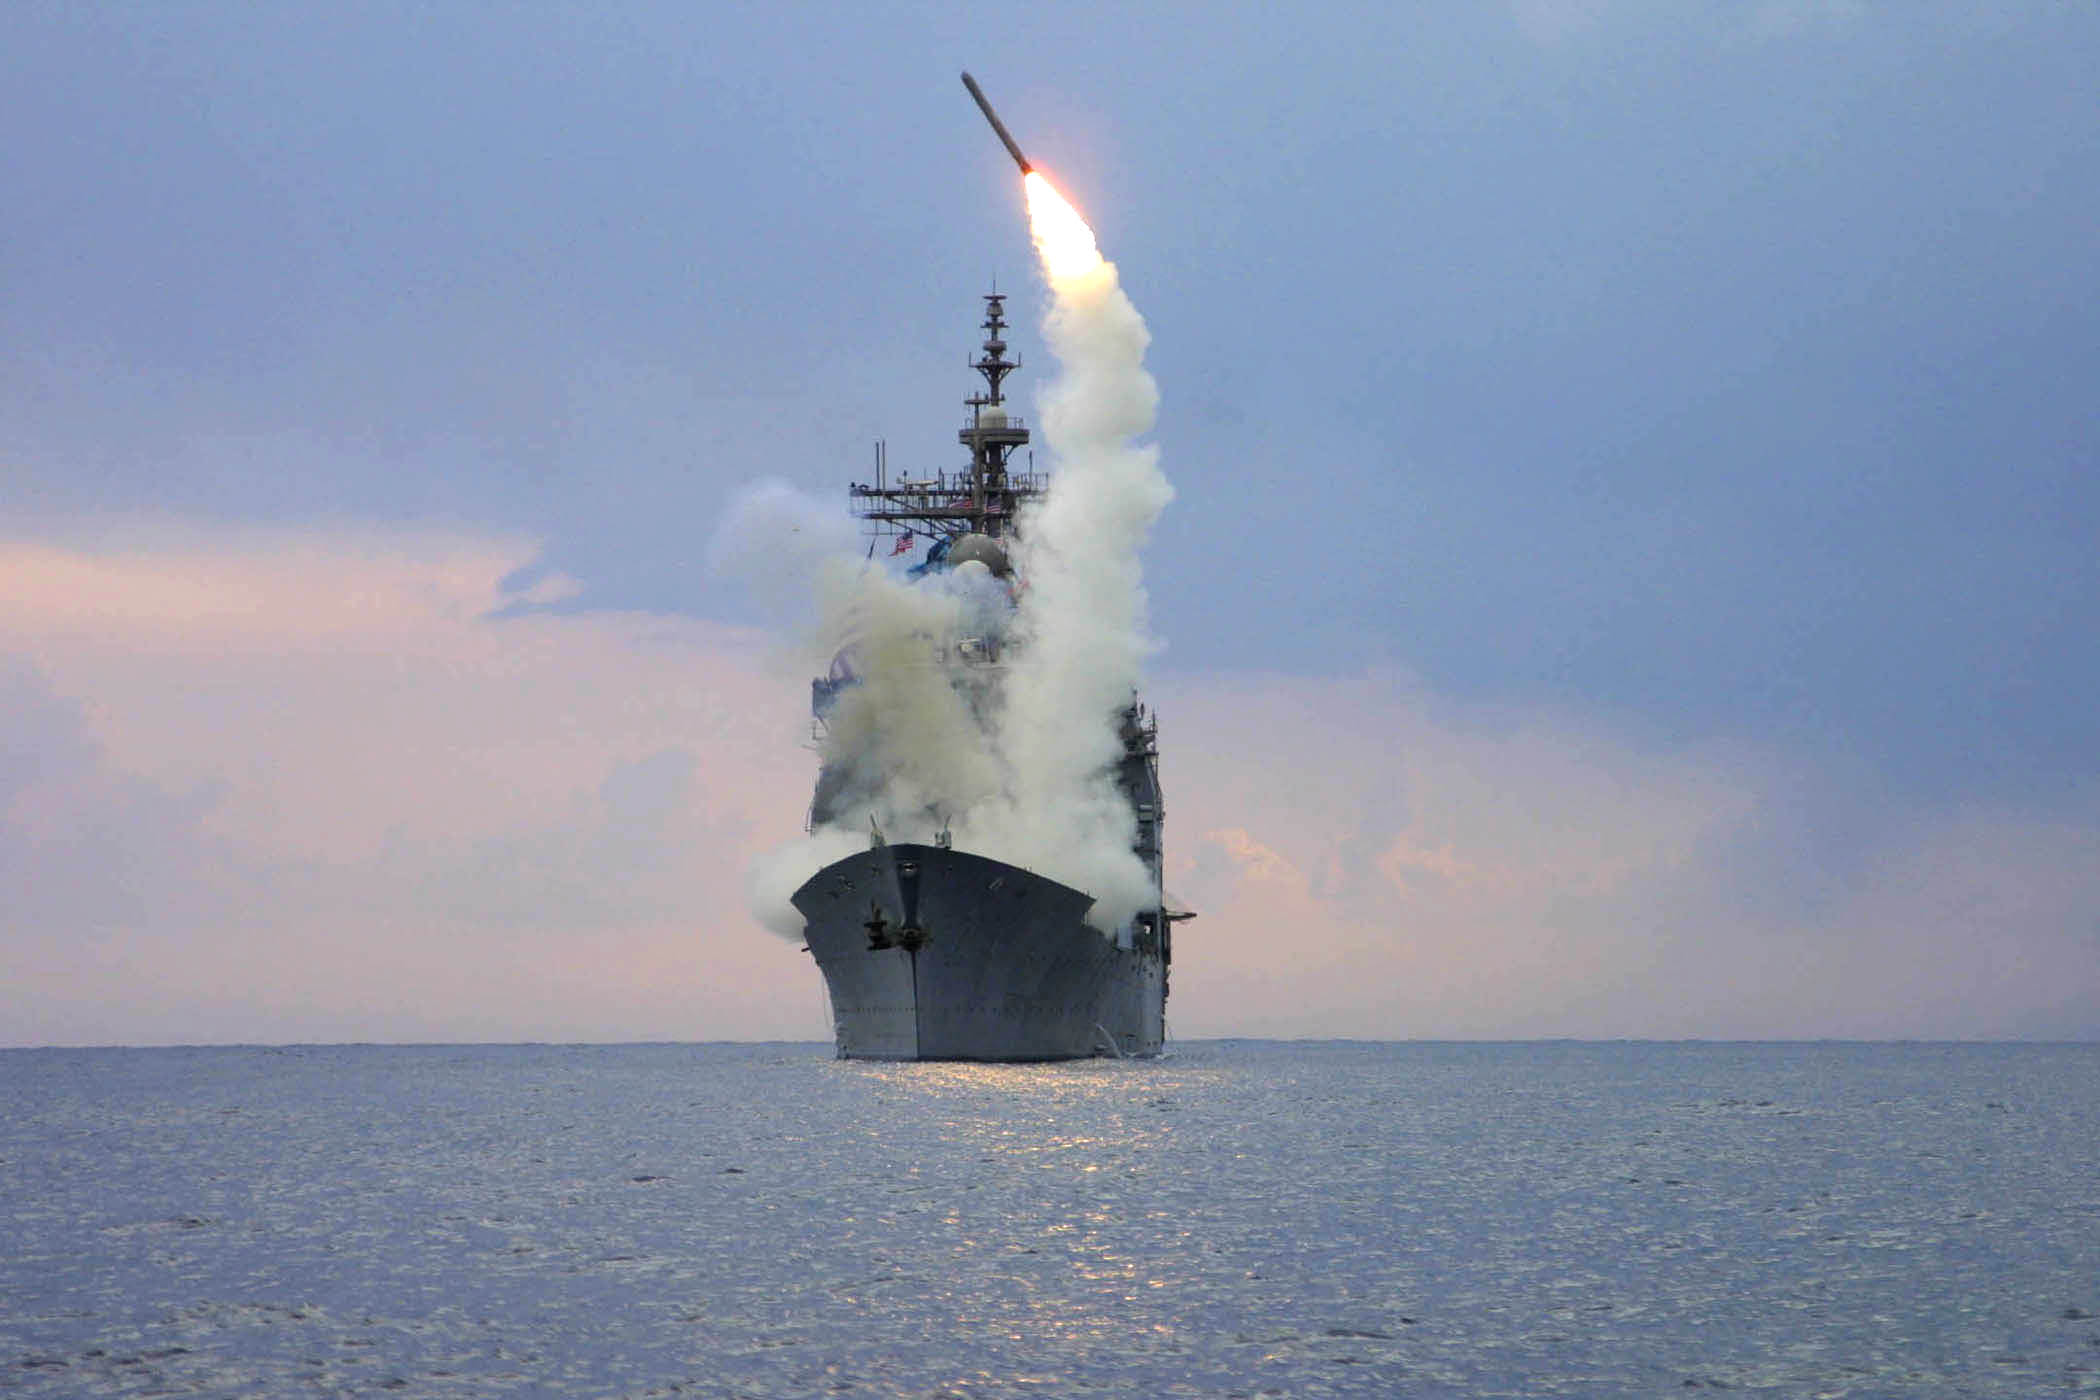 At sea aboard USS Cape St. George (CG 71) Mar. 23, 2003 -- A Tomahawk Land Attack Missile (TLAM) is launched from the guided missile cruiser USS Cape St. George. Cape St. George is operating in the eastern Med